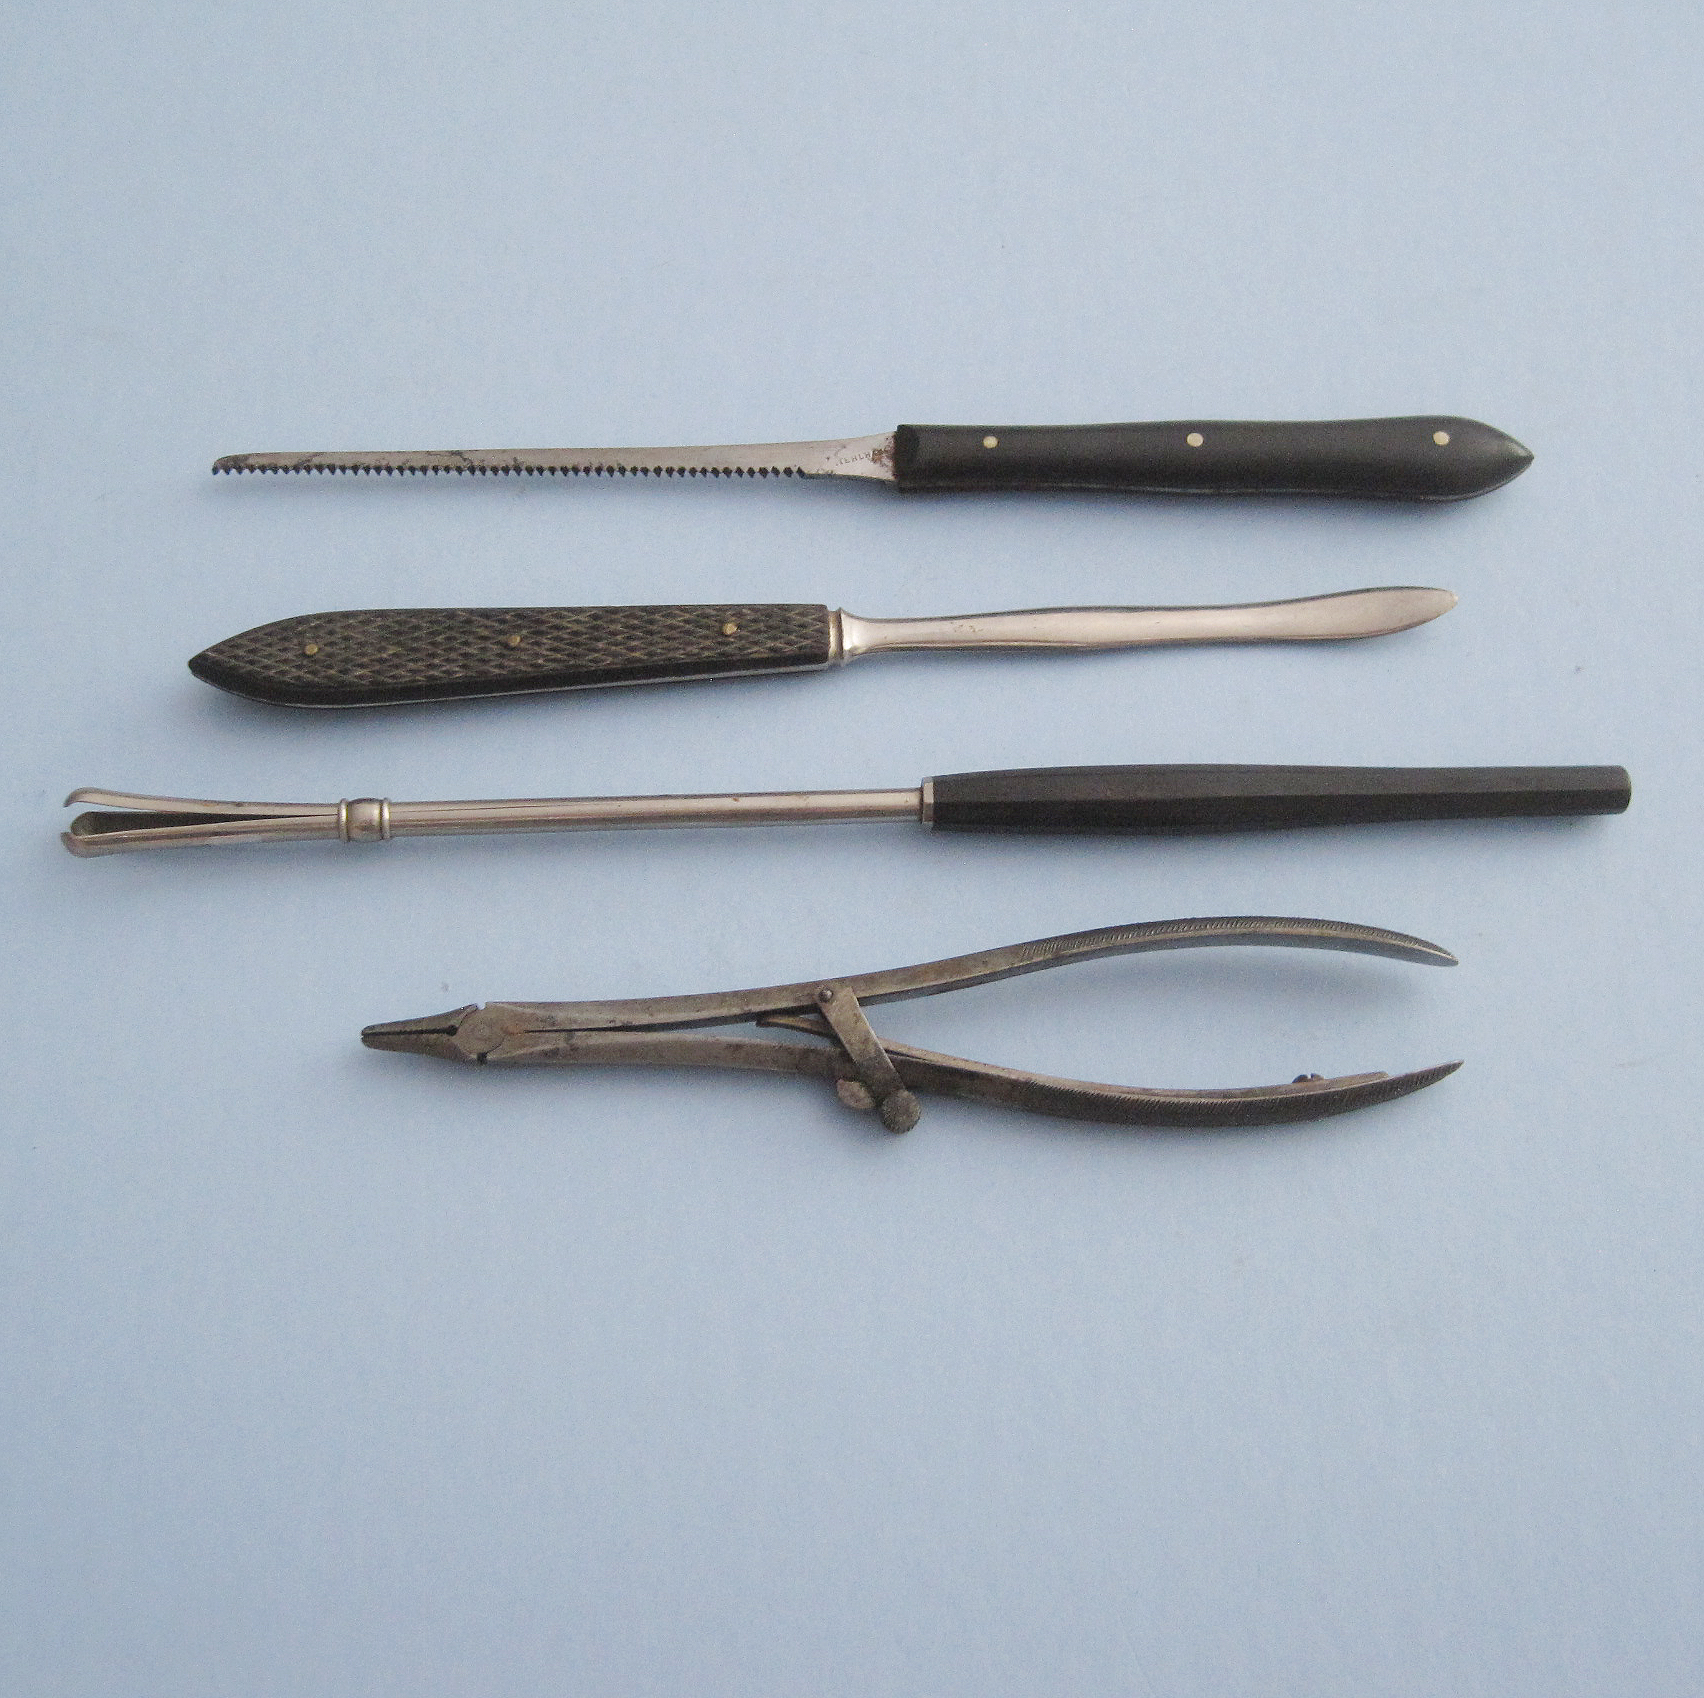 Some Worthy Surgical Bits and Bobs